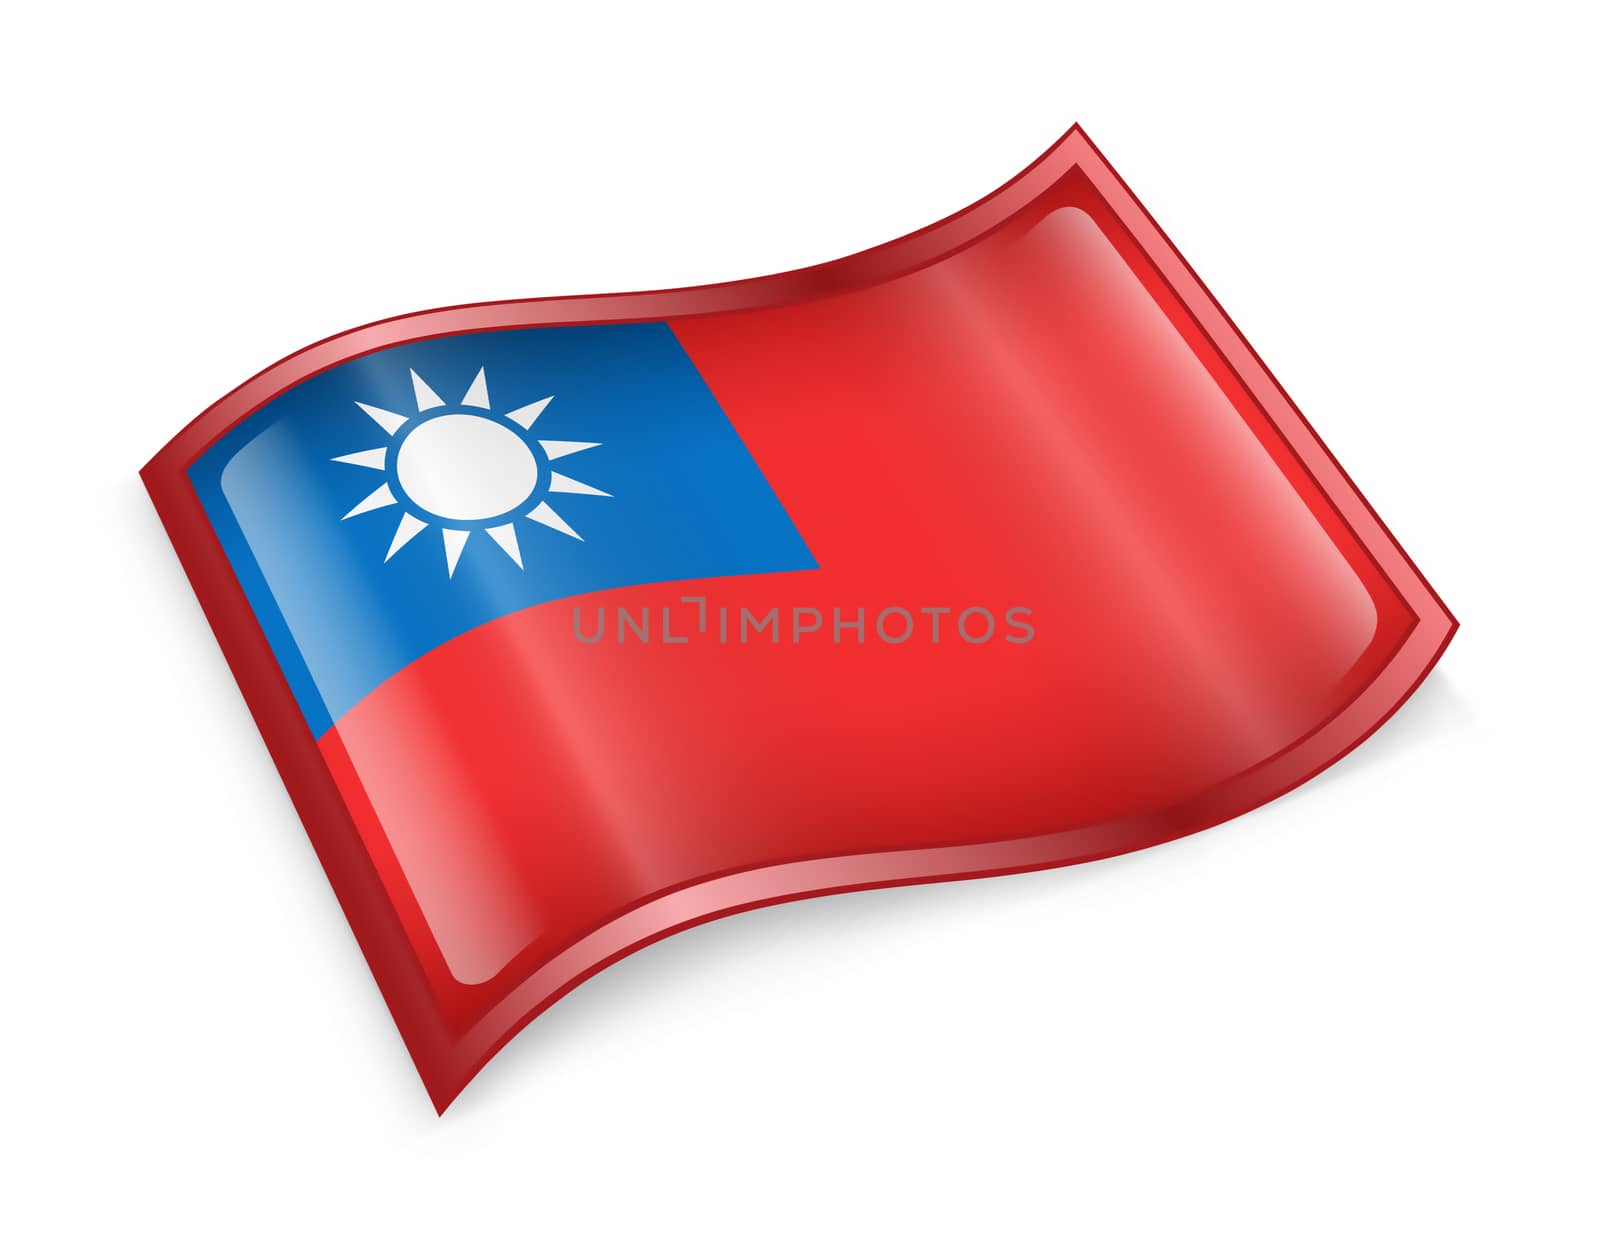 Taiwan Flag icon, isolated on white background.